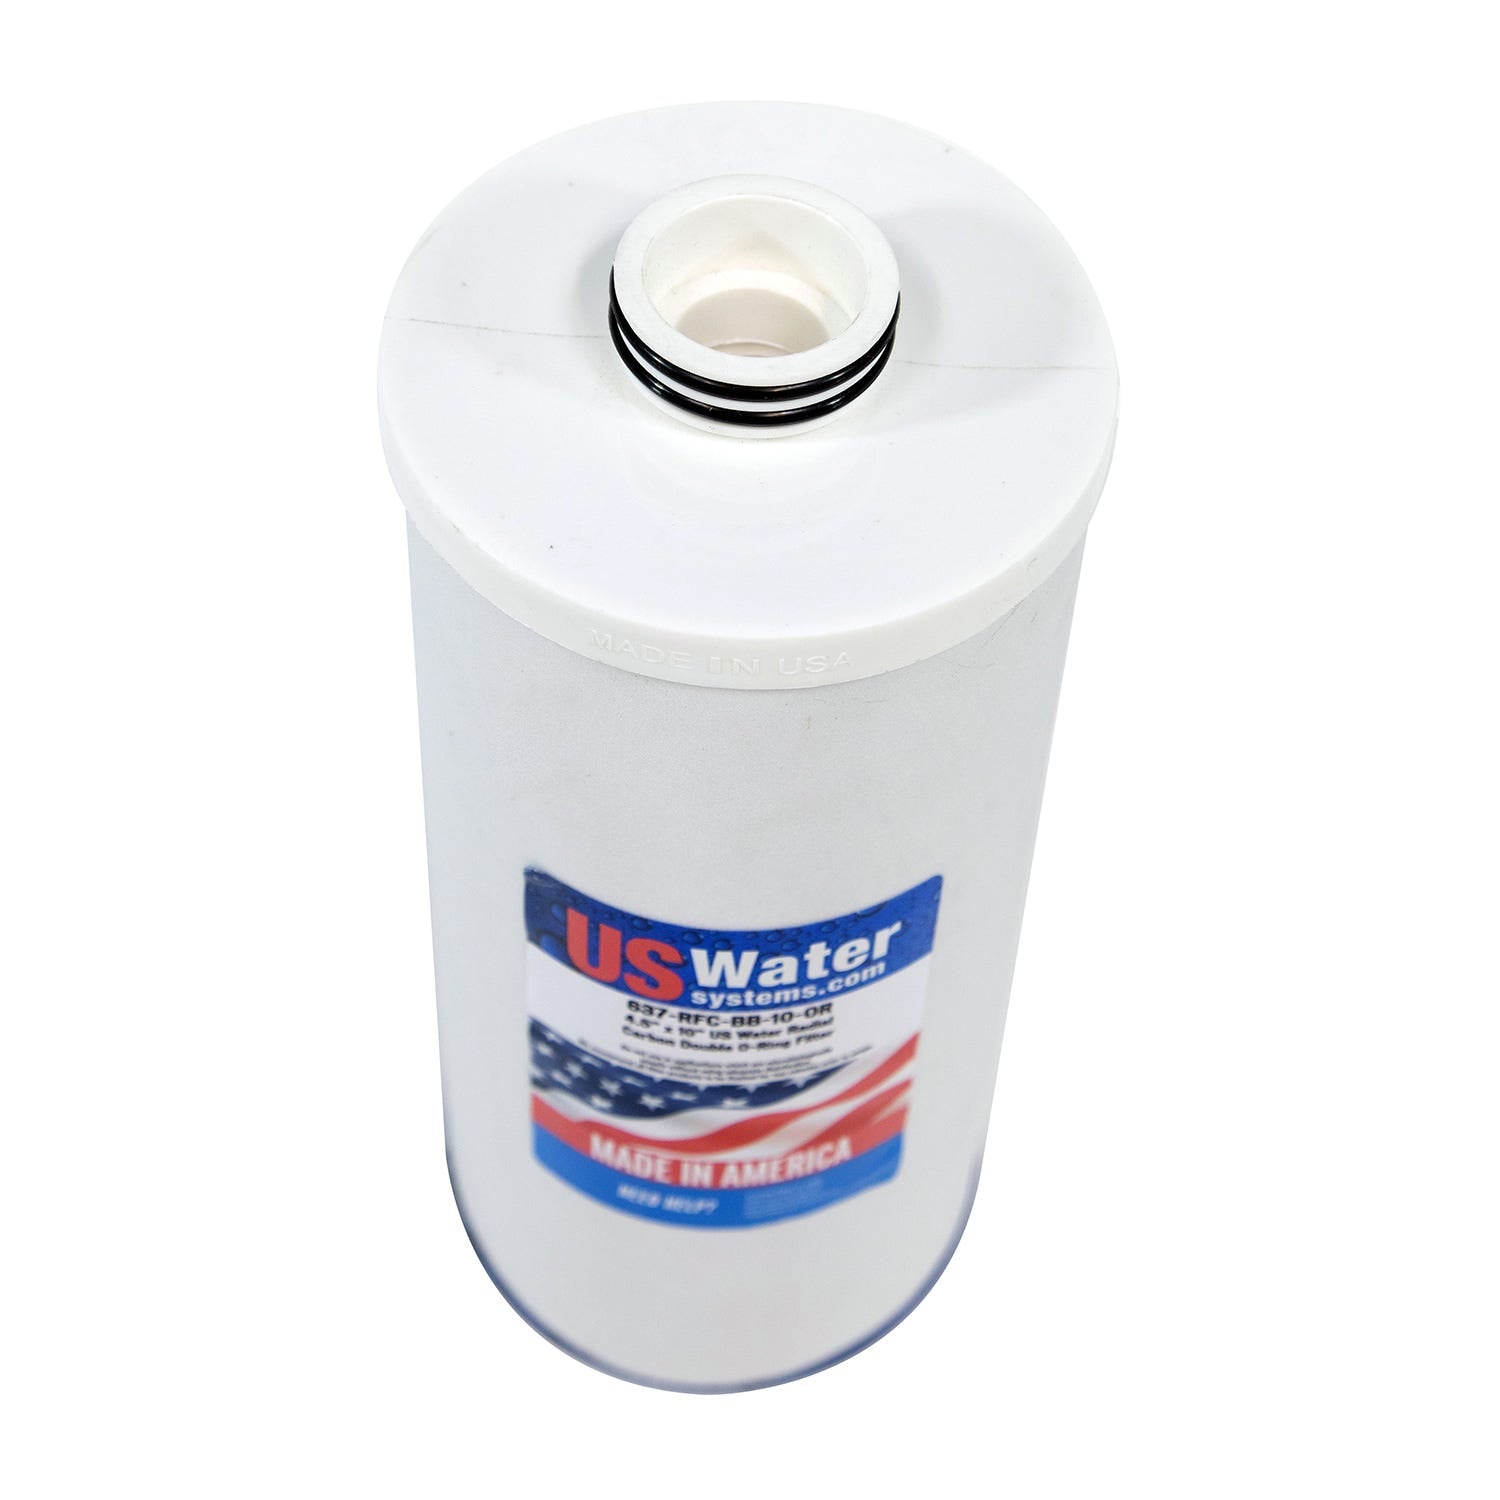 US Water Systems Radial Flow Carbon Filter 4.5" x 10" | Double O-Ring Seal